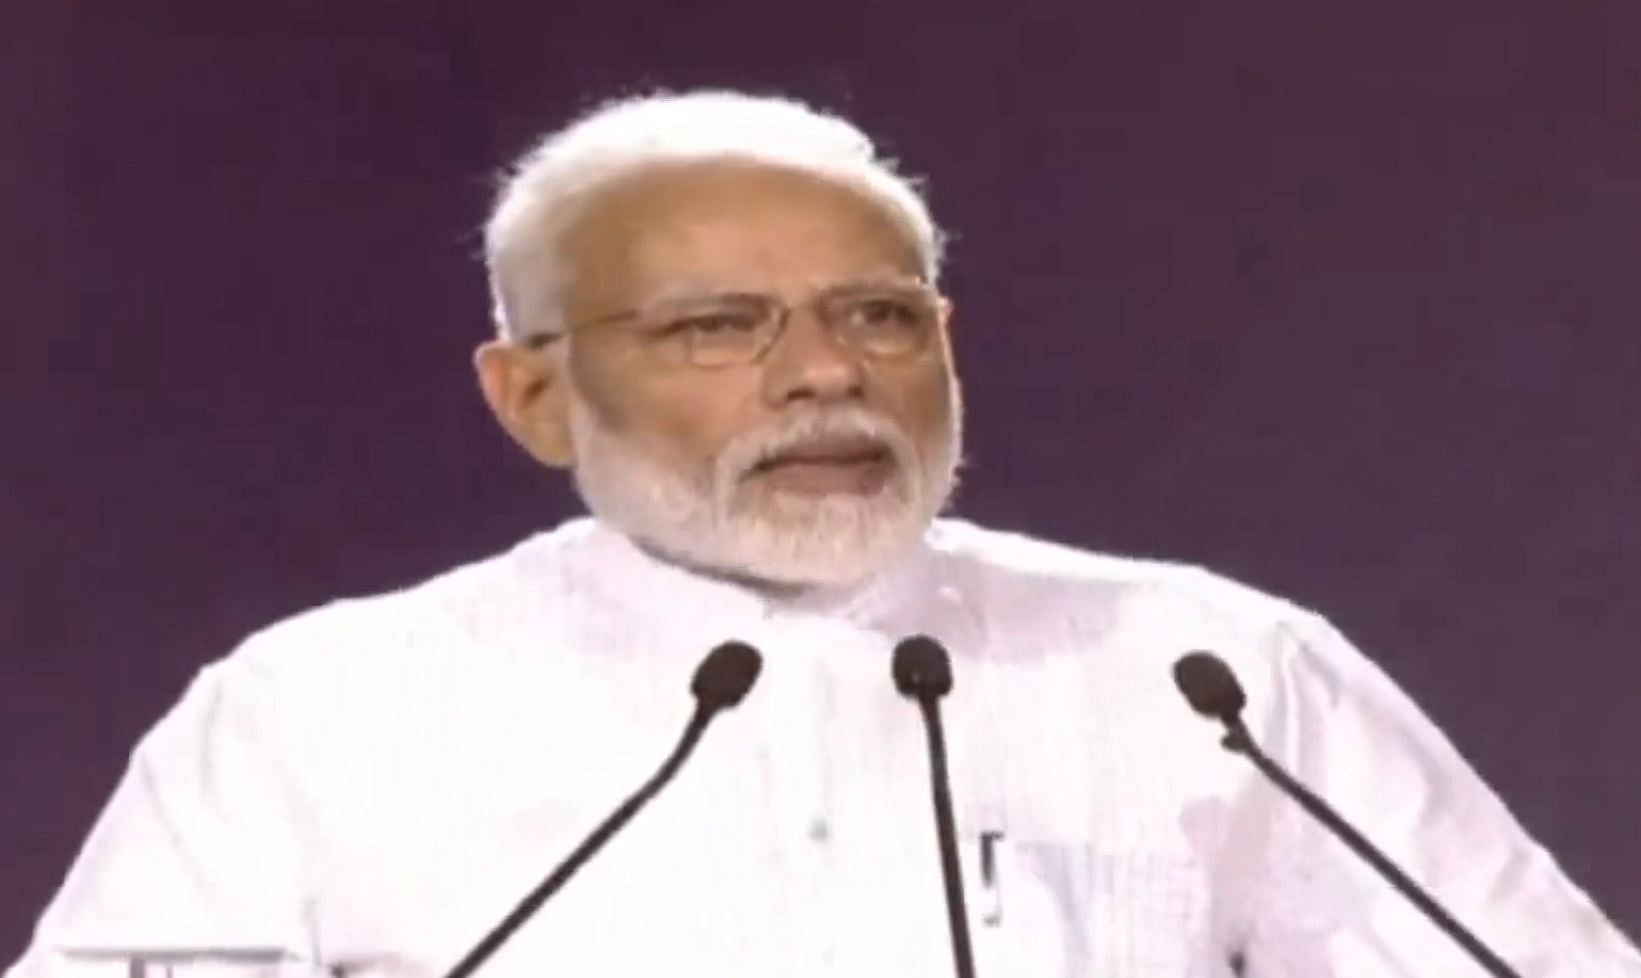 Prime Minister Narendra Modi speaking at the launching ceremony of Fit India Movement. (Videograb)